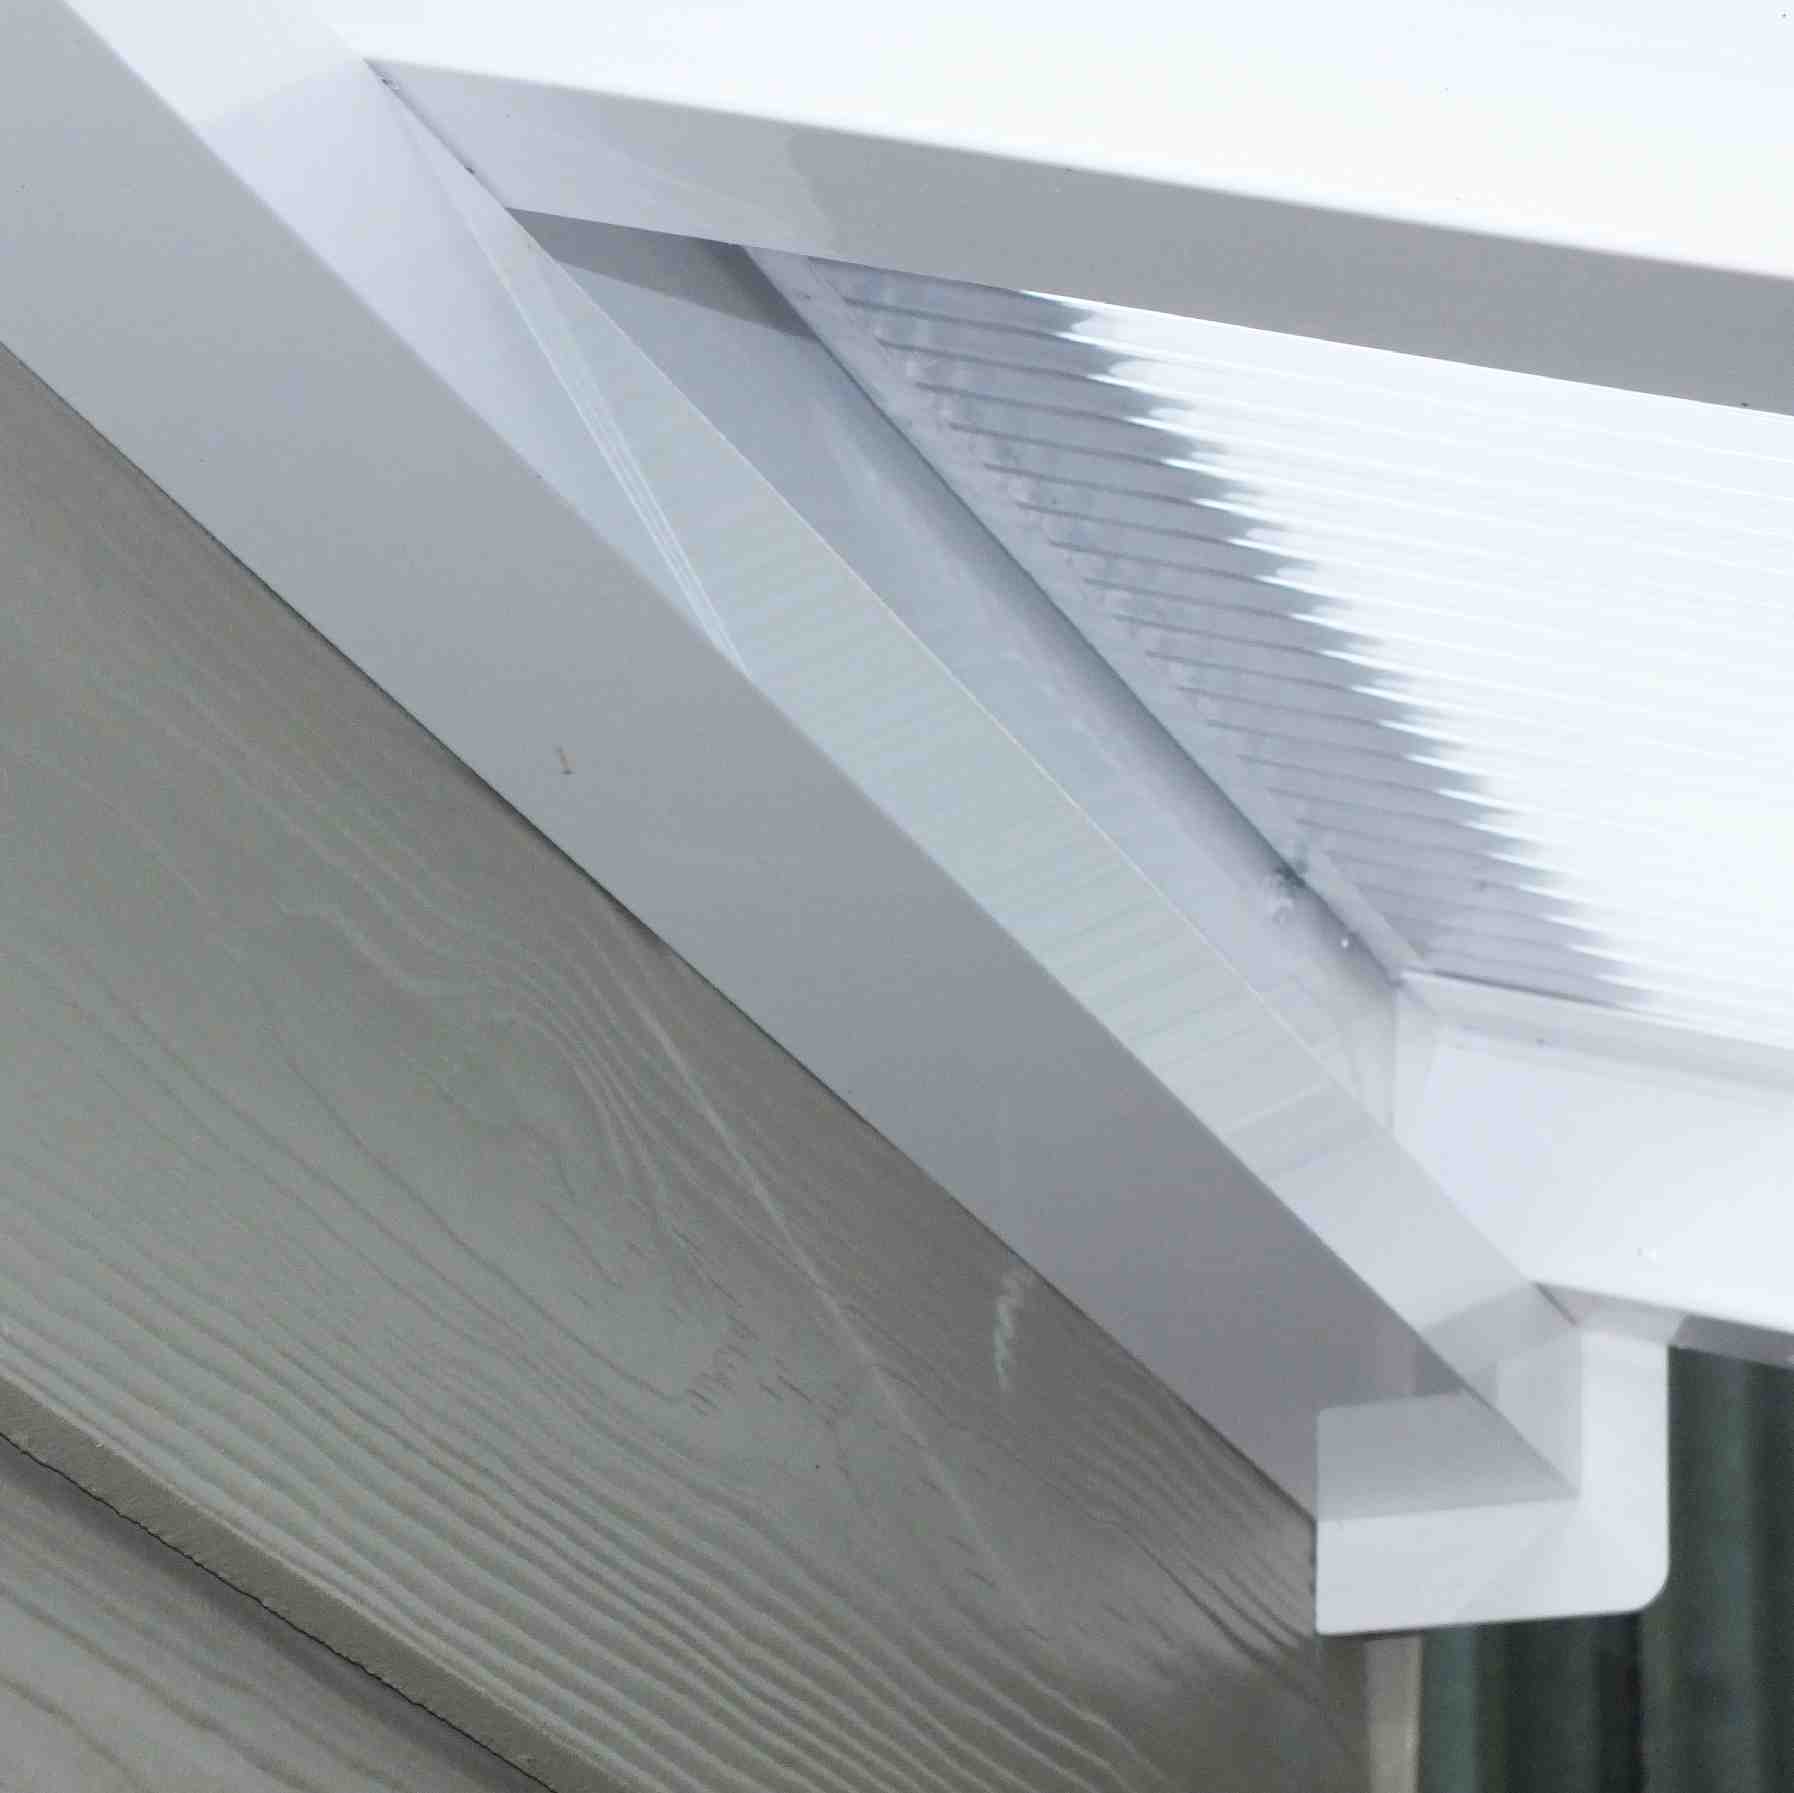 Great deals on Omega Verandah White with 16mm Polycarbonate Glazing - 6.3m (W) x 2.5m (P), (4) Supporting Posts